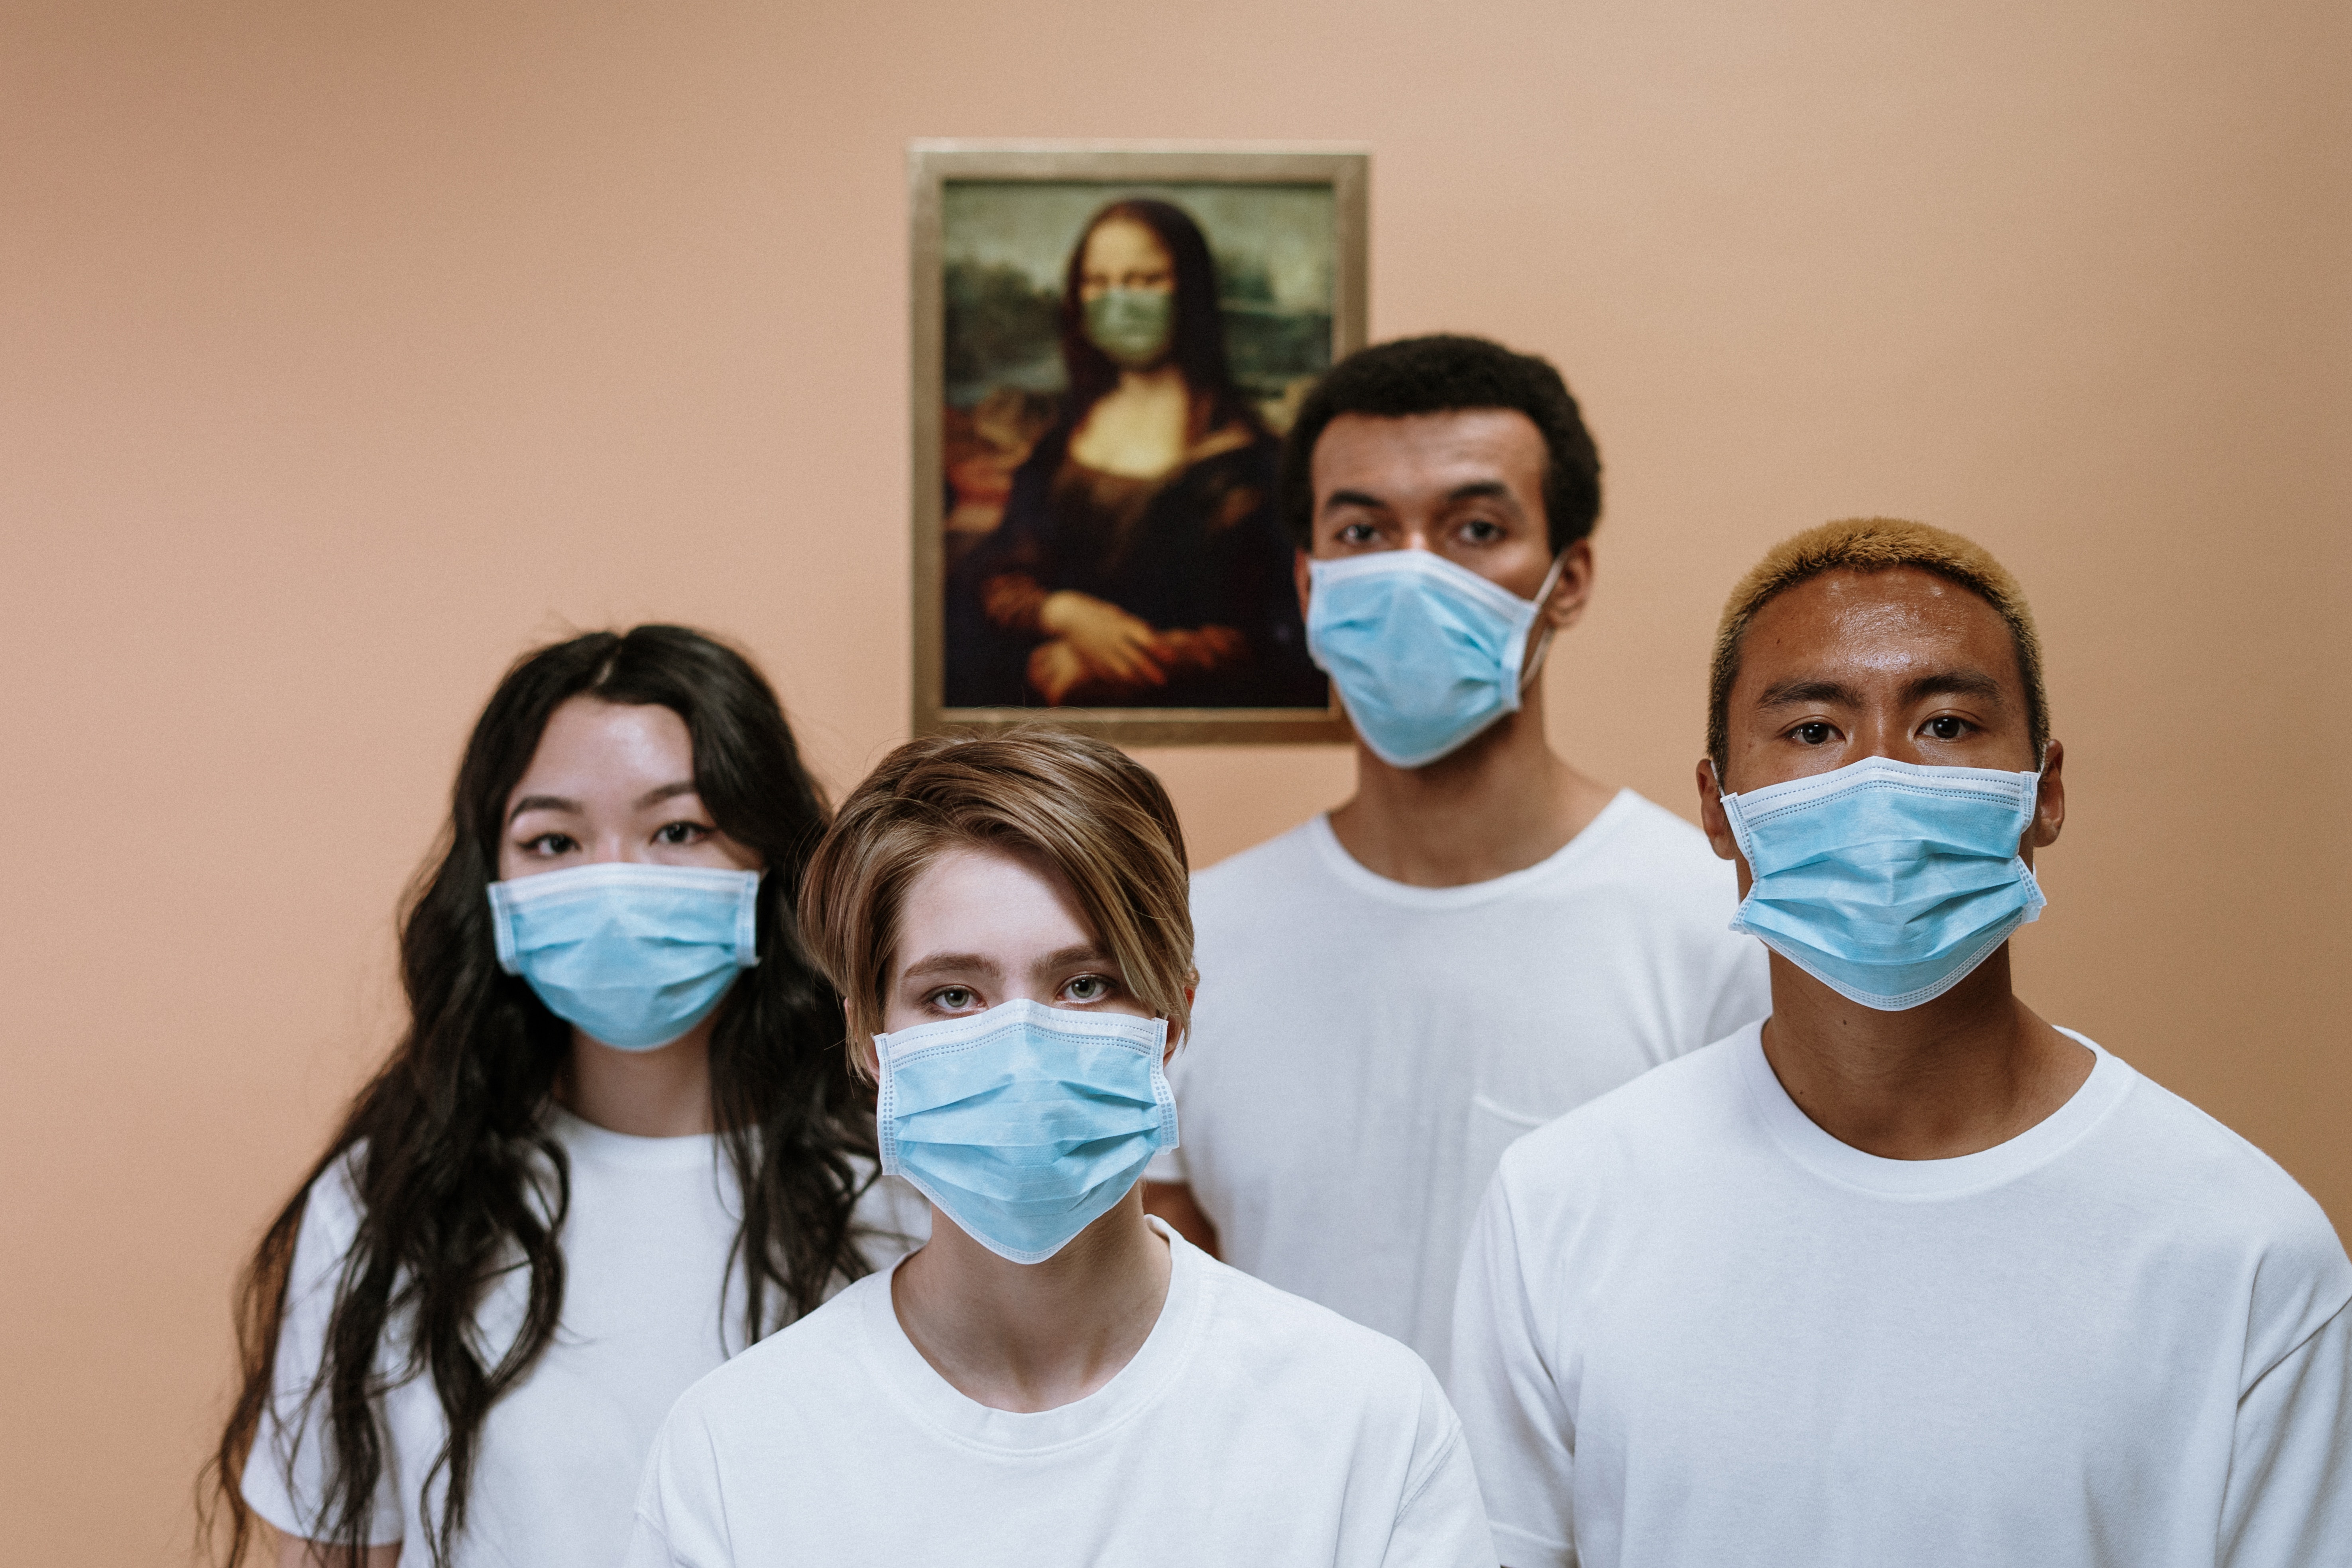 Workers wearing face masks. Photo by cottonbro from Pexels.